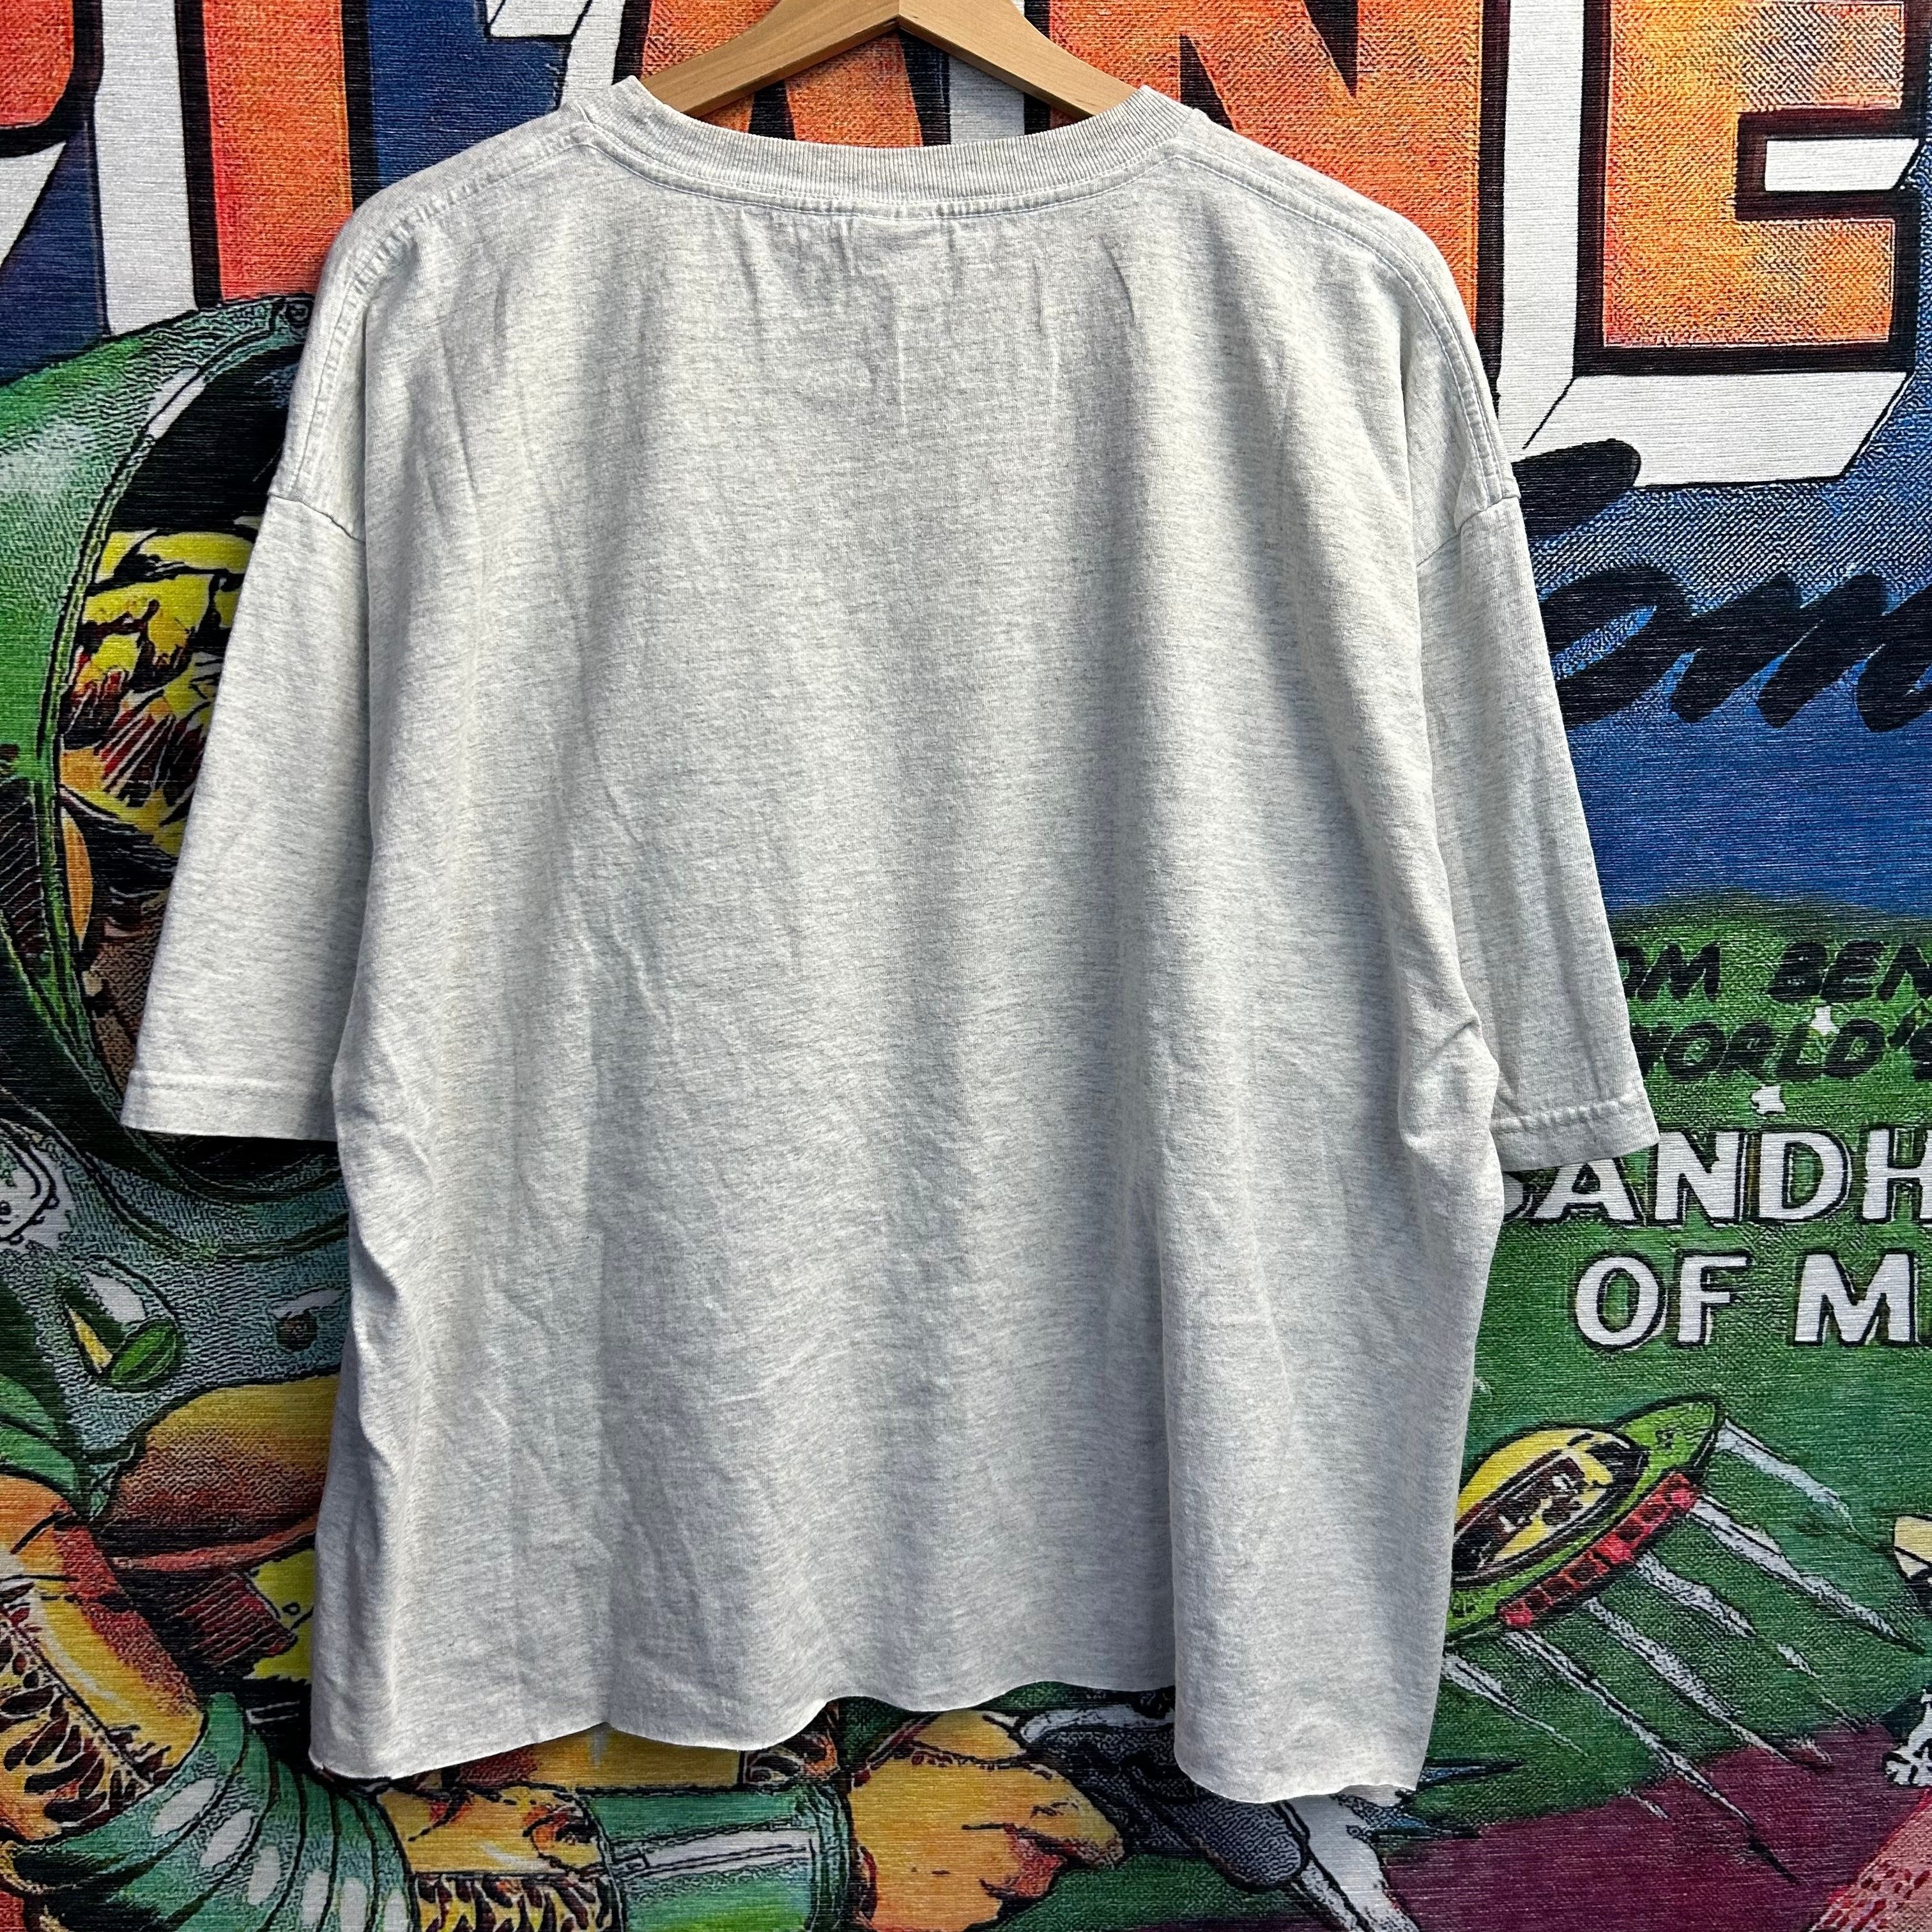 Vintage Vintage 90’s Yellowstone National Park Tee Size Large Size US L / EU 52-54 / 3 - 2 Preview